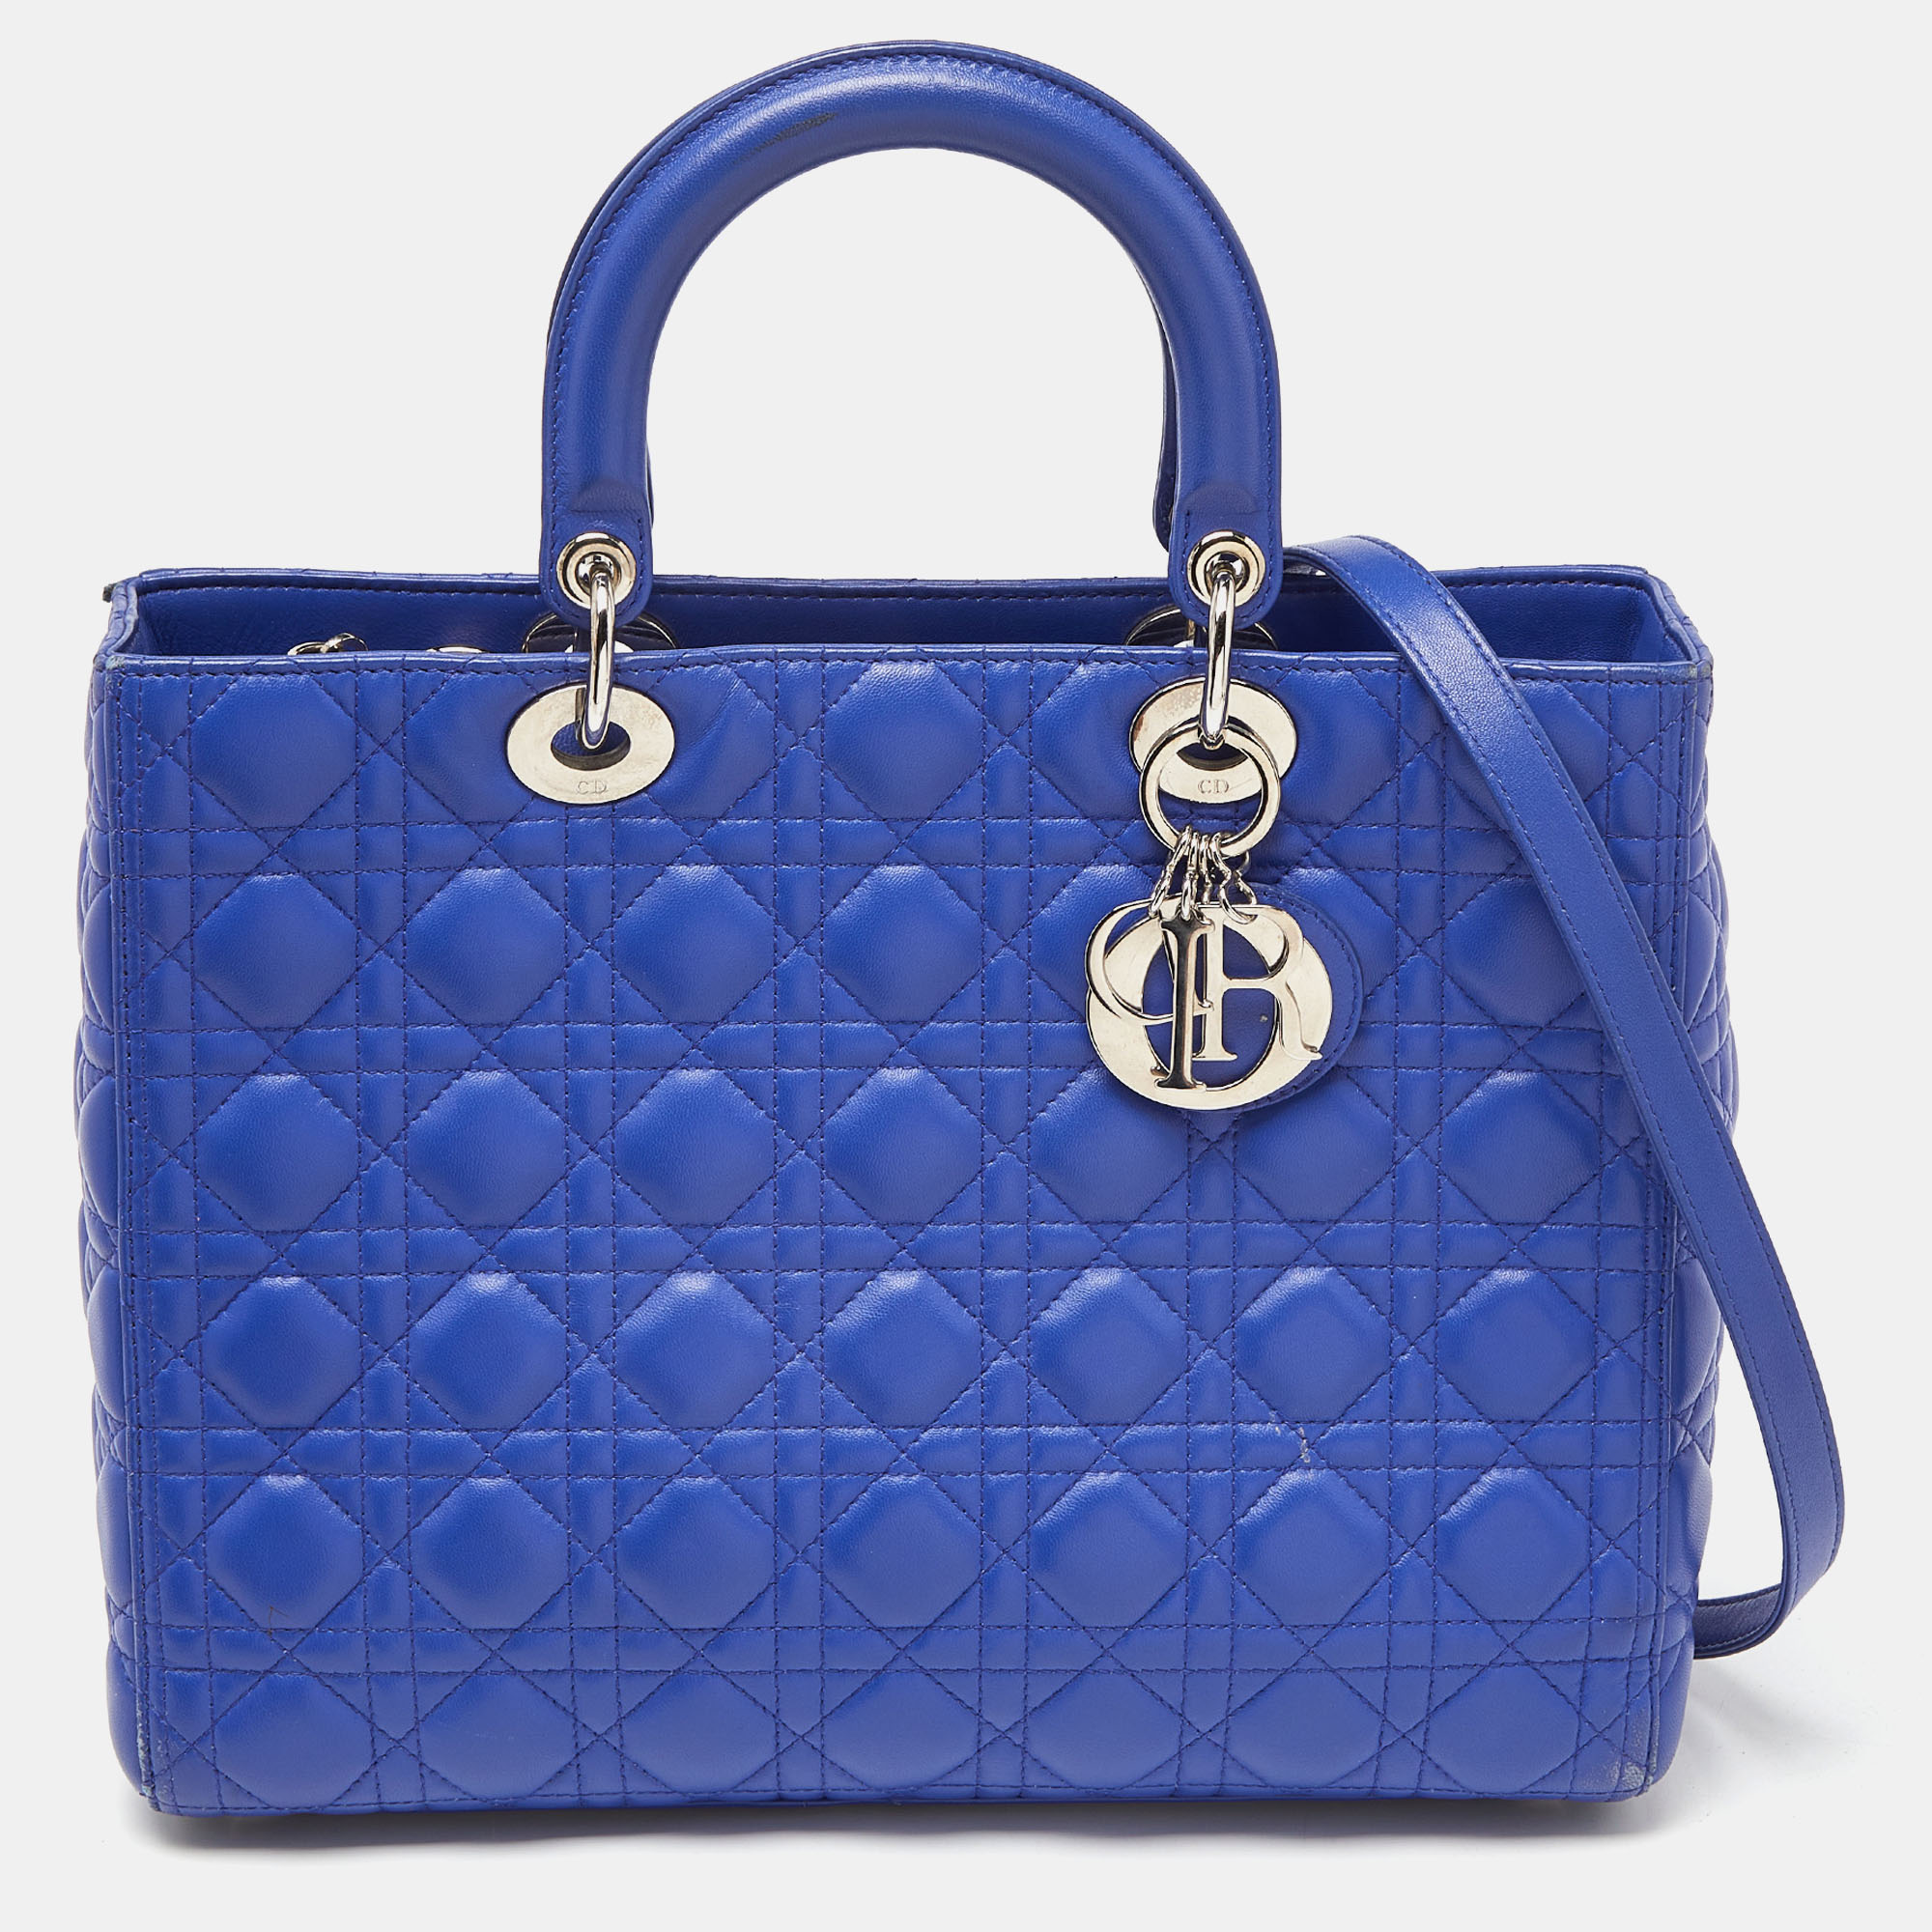 Dior blue cannage leather large lady dior tote